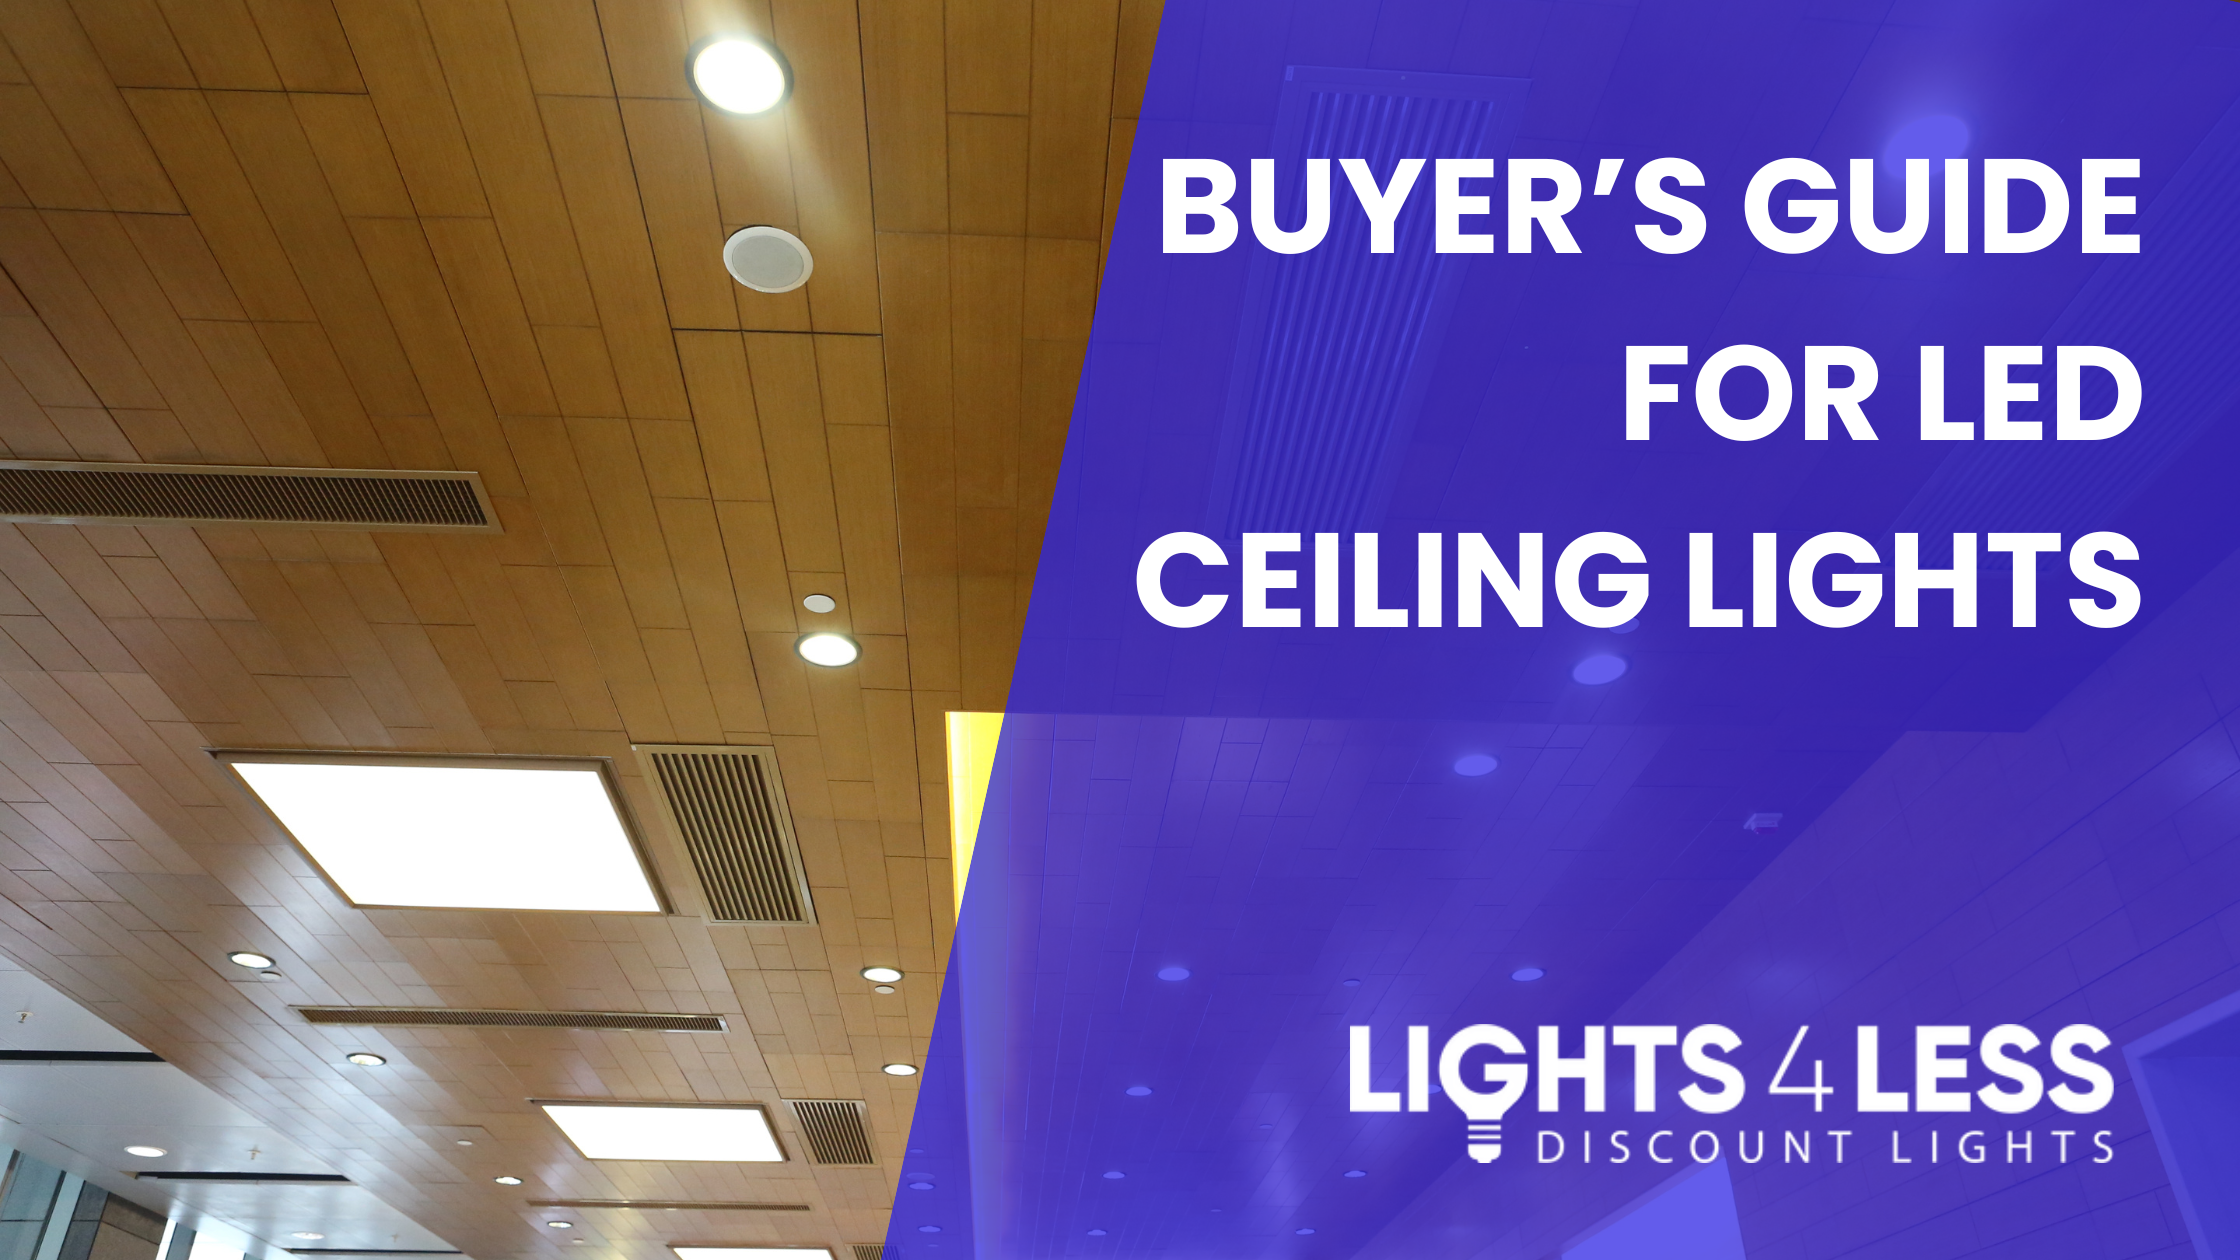 Buyer’s Guide For LED Ceiling Lights